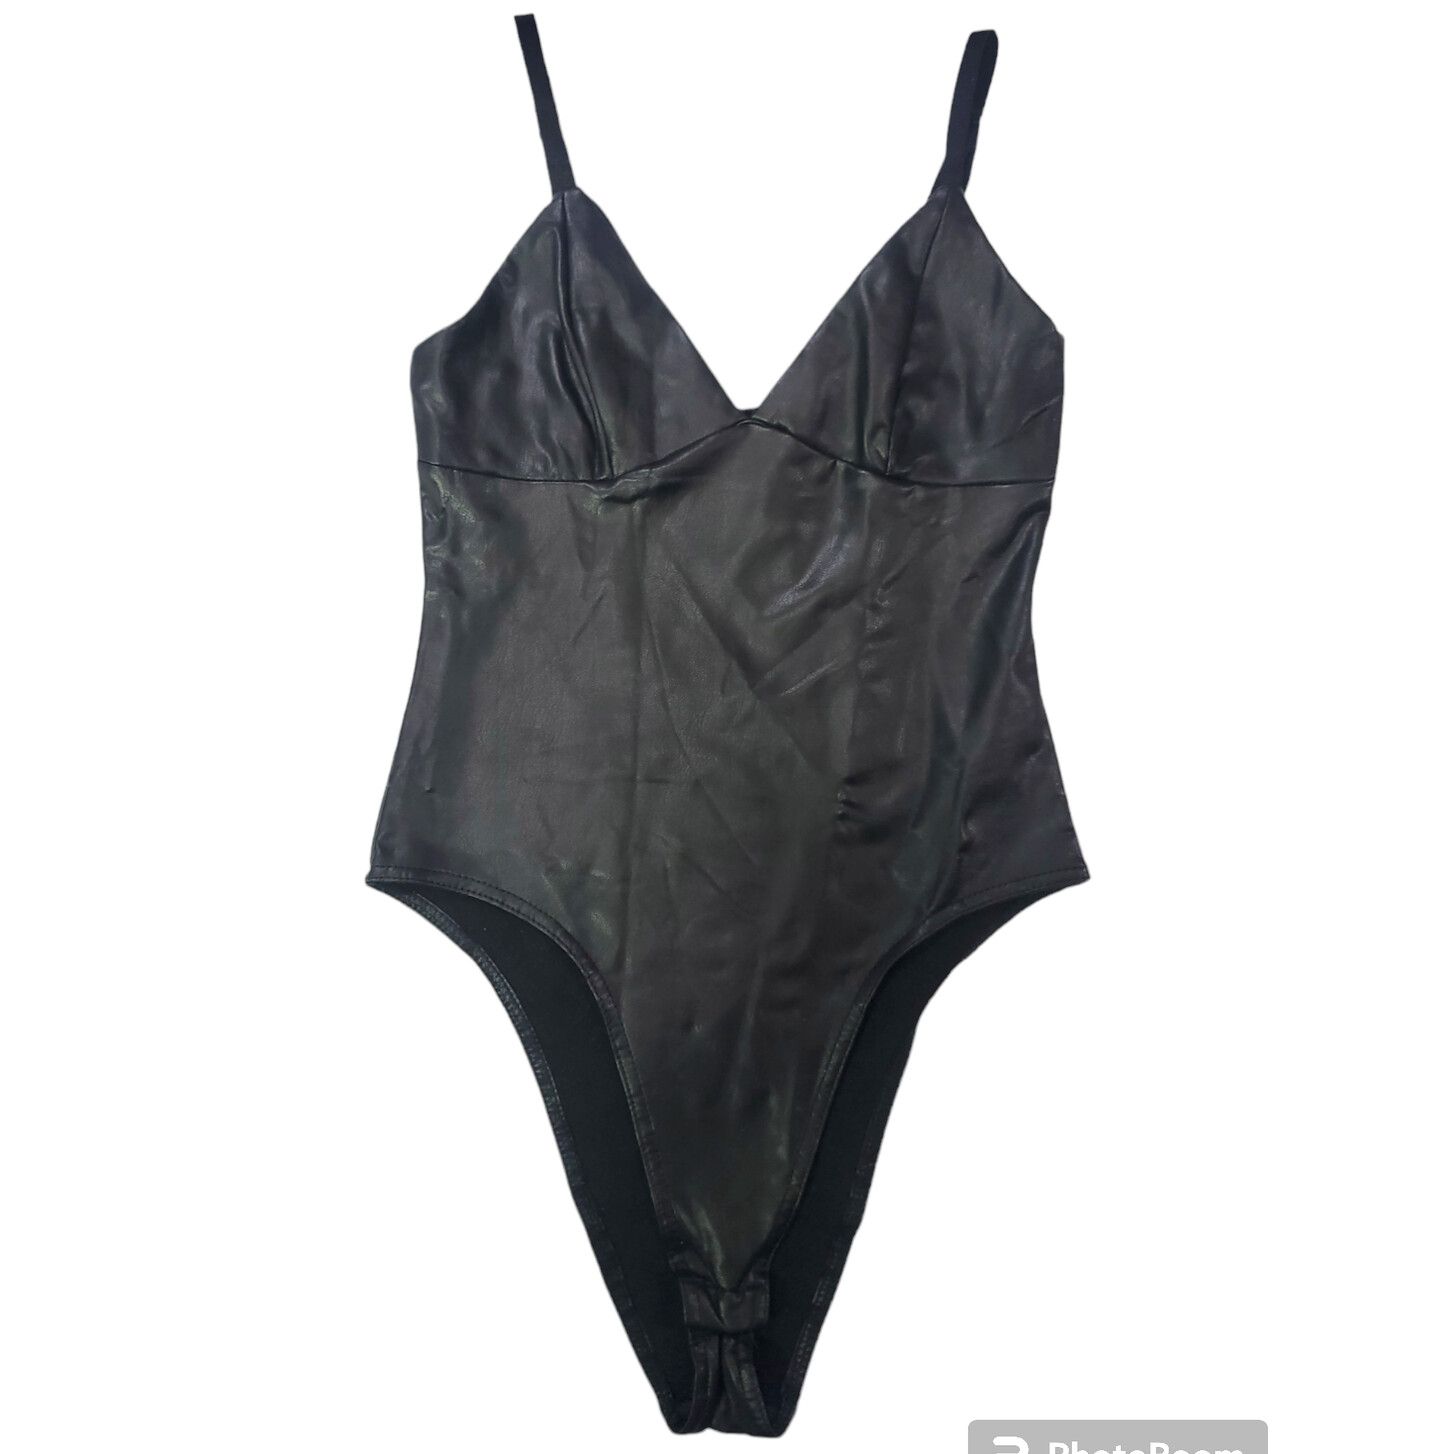 Forever 21 Forever 21 | Black, High Cut, Faux Leather Bodysuit | Size S ...